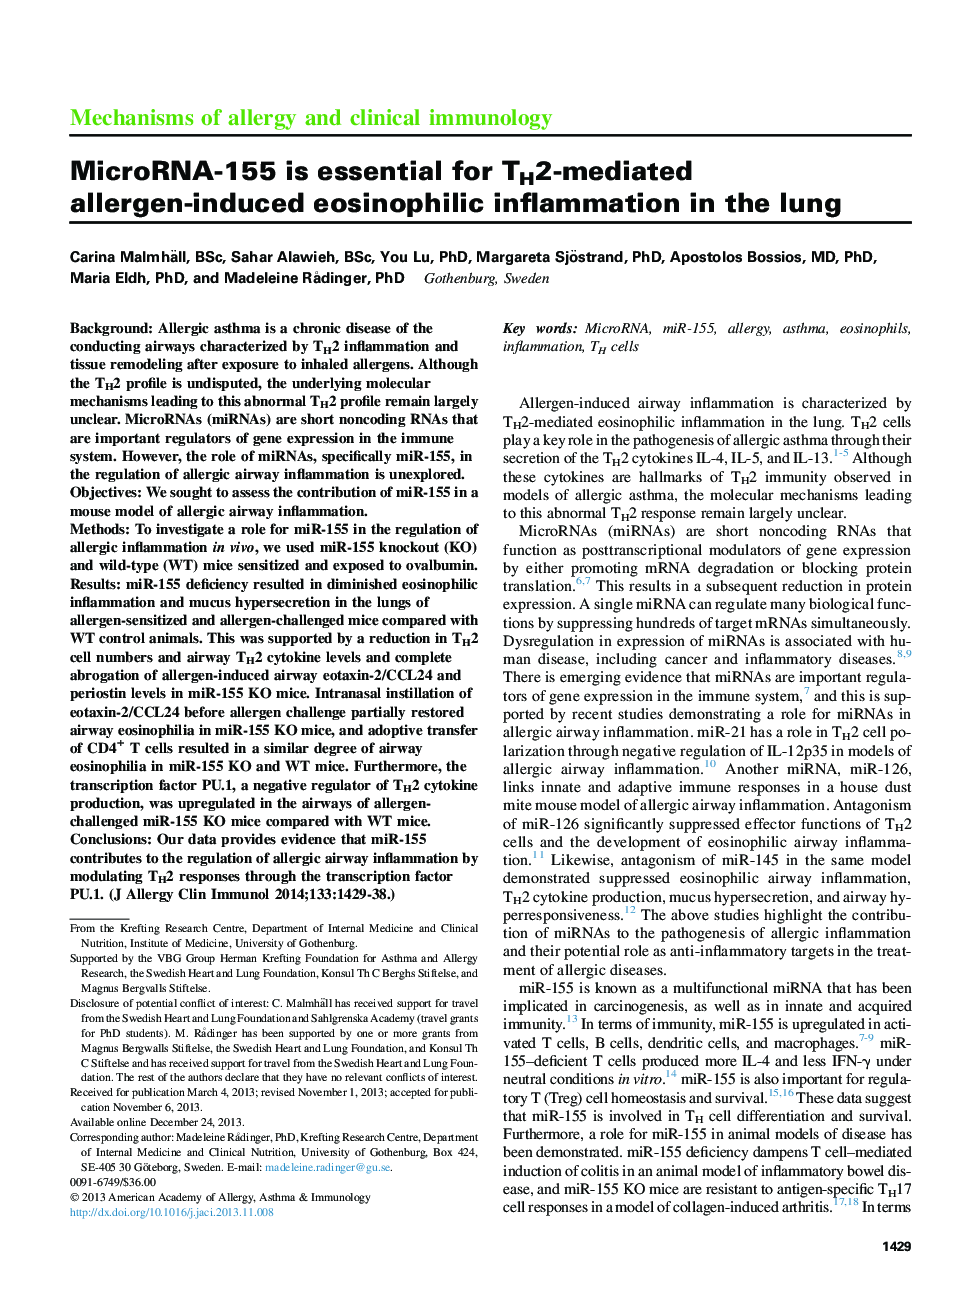 Mechanisms of allergy and clinical immunologyMicroRNA-155 is essential for TH2-mediated allergen-induced eosinophilic inflammation in the lung